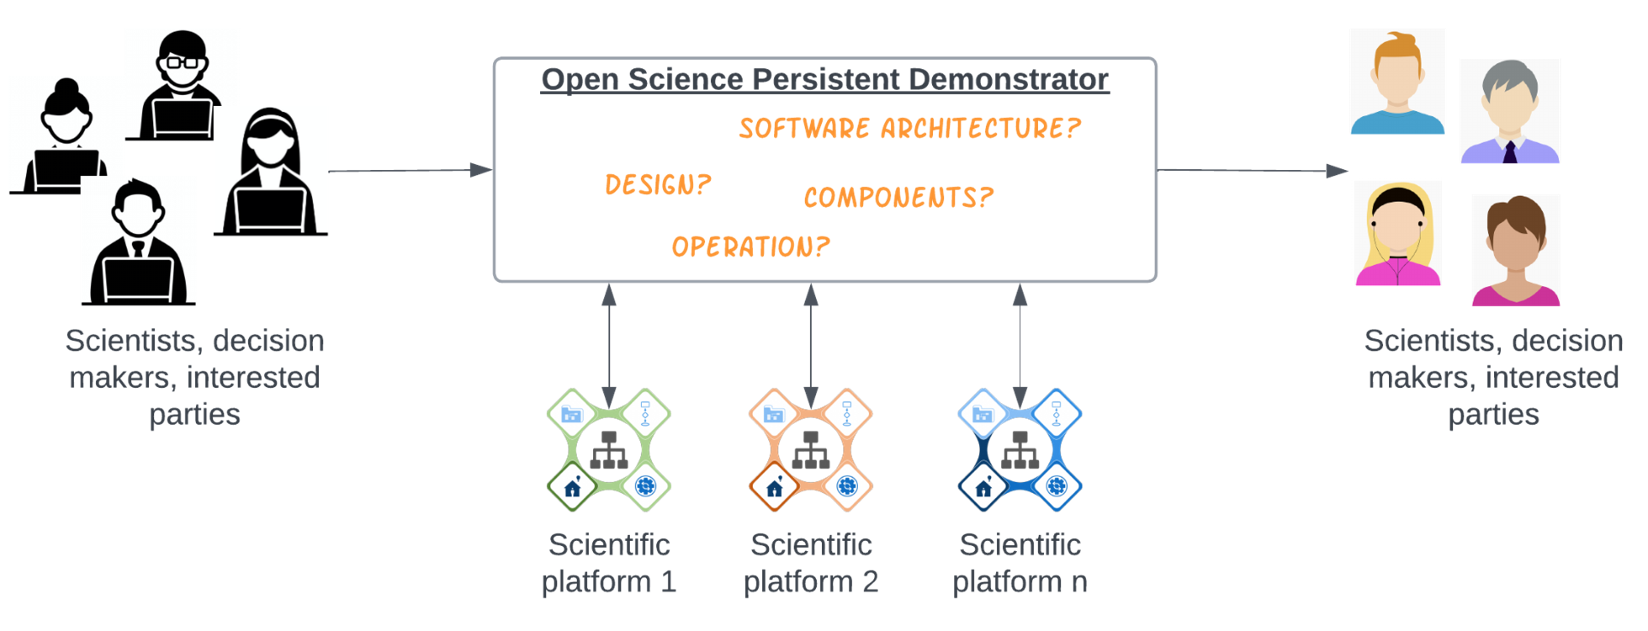 Core elements and RFI questions for the Open Science Persistent Demonstrator